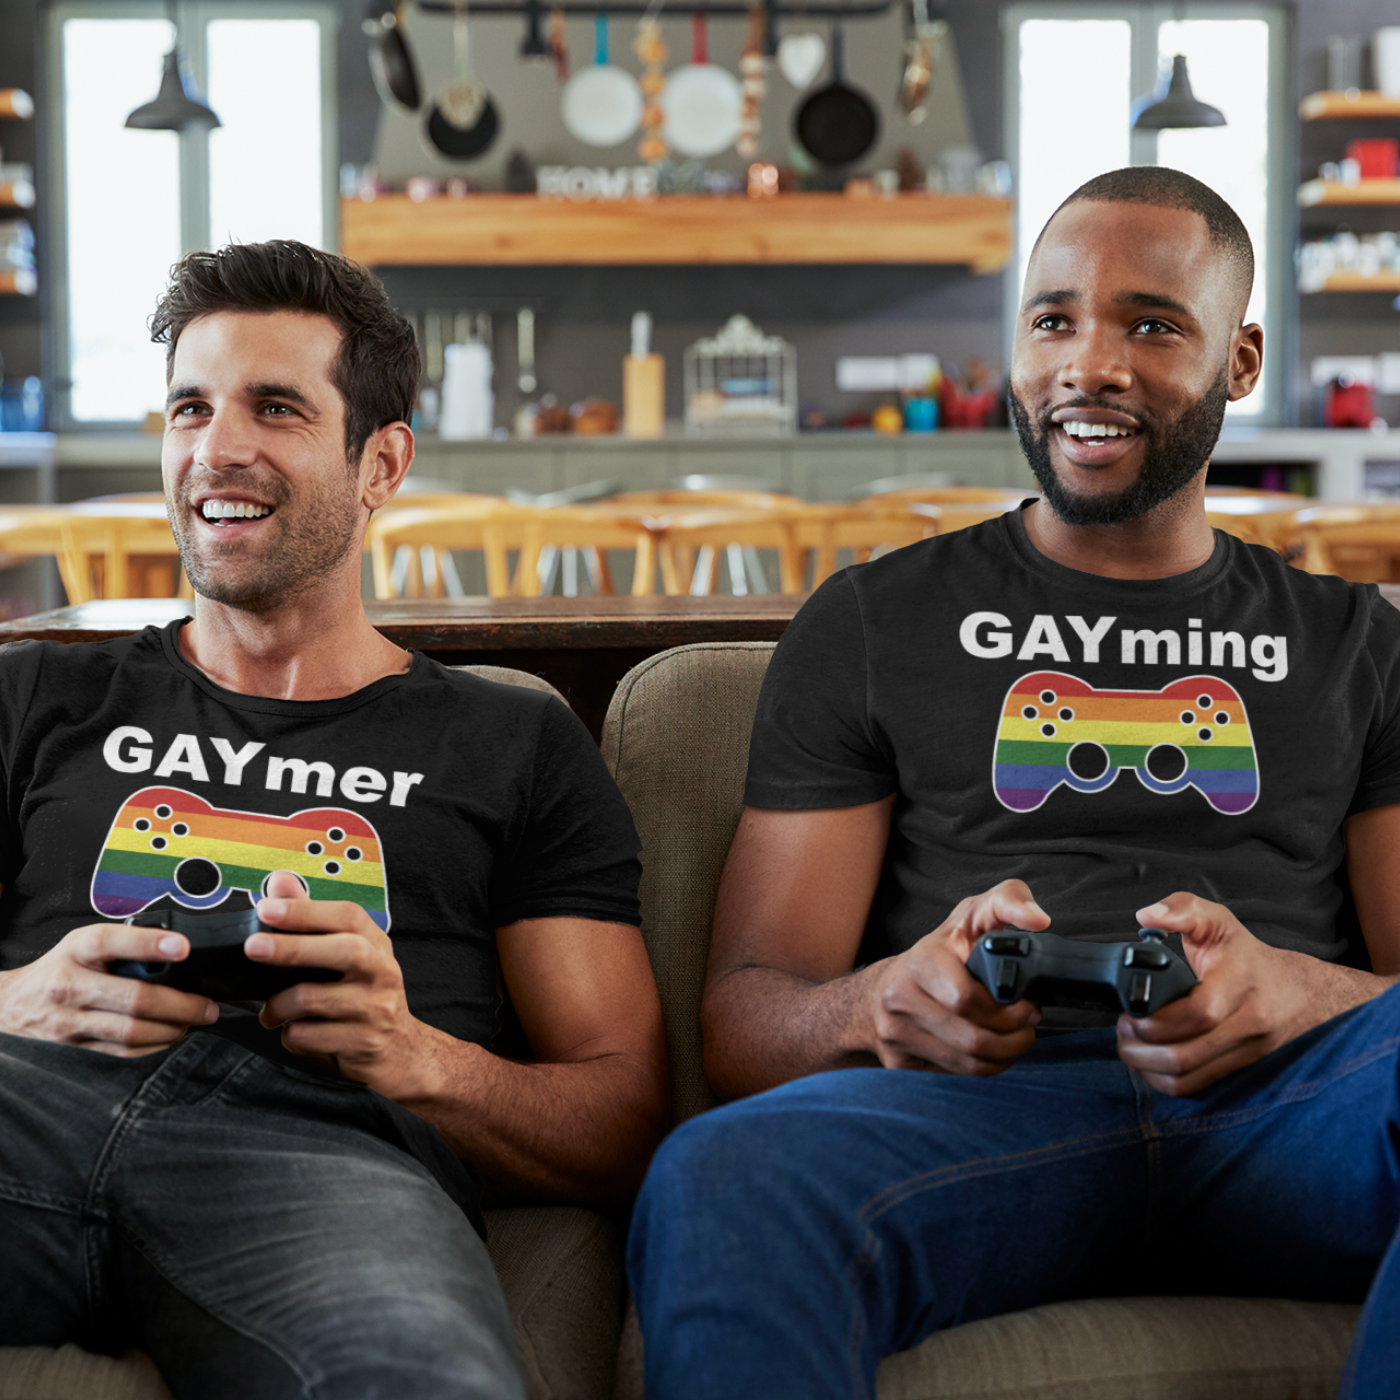 For the ultimate in comfortable clothing for the gay man who loves to game every day or with friends. Show them you are serious about being a gaymer by wearing these colorful t-shirts in a variety of colors. comes in gaymer and gayming design